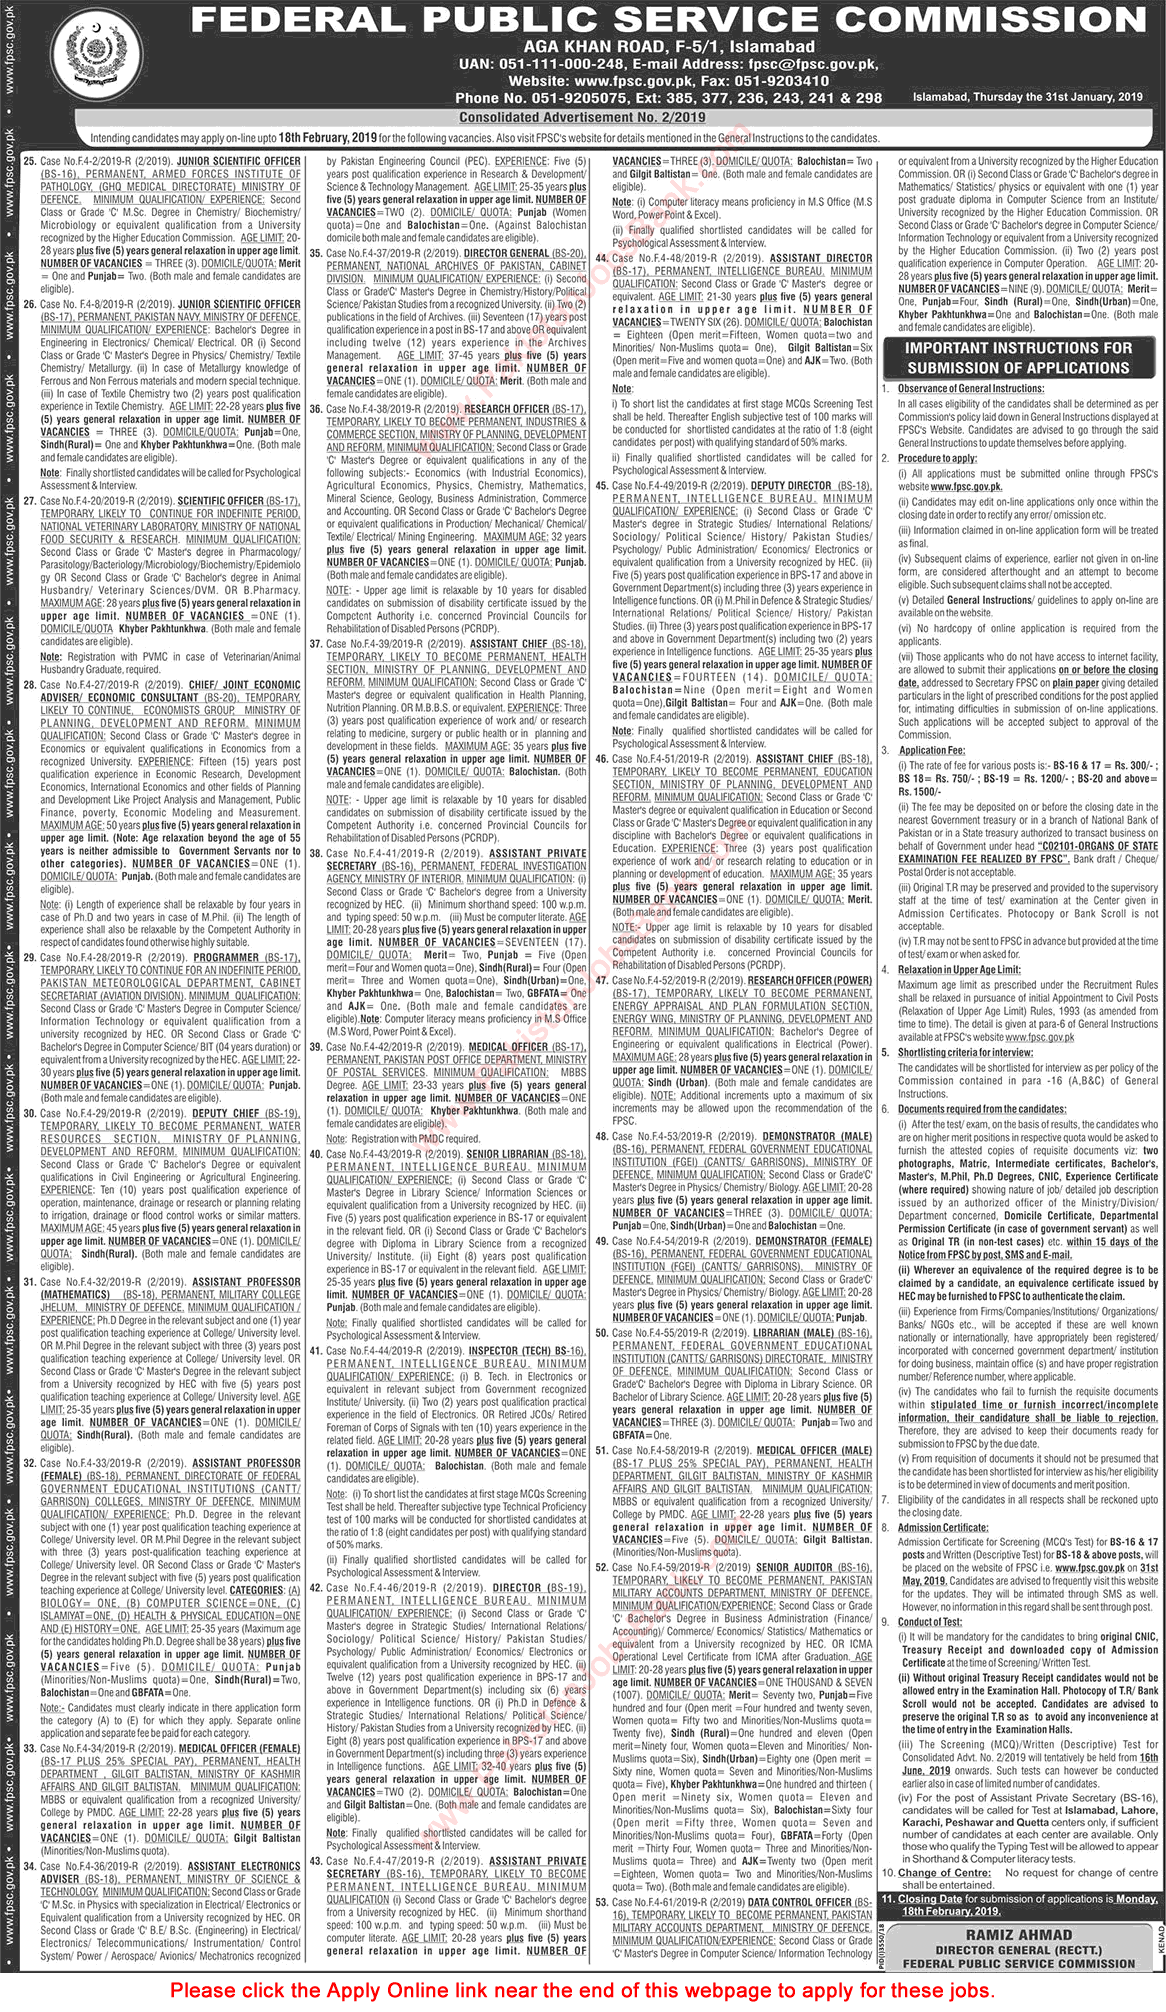 FPSC Jobs February 2019 Apply Online Consolidated Advertisement No 02/2019 2/2019 Latest